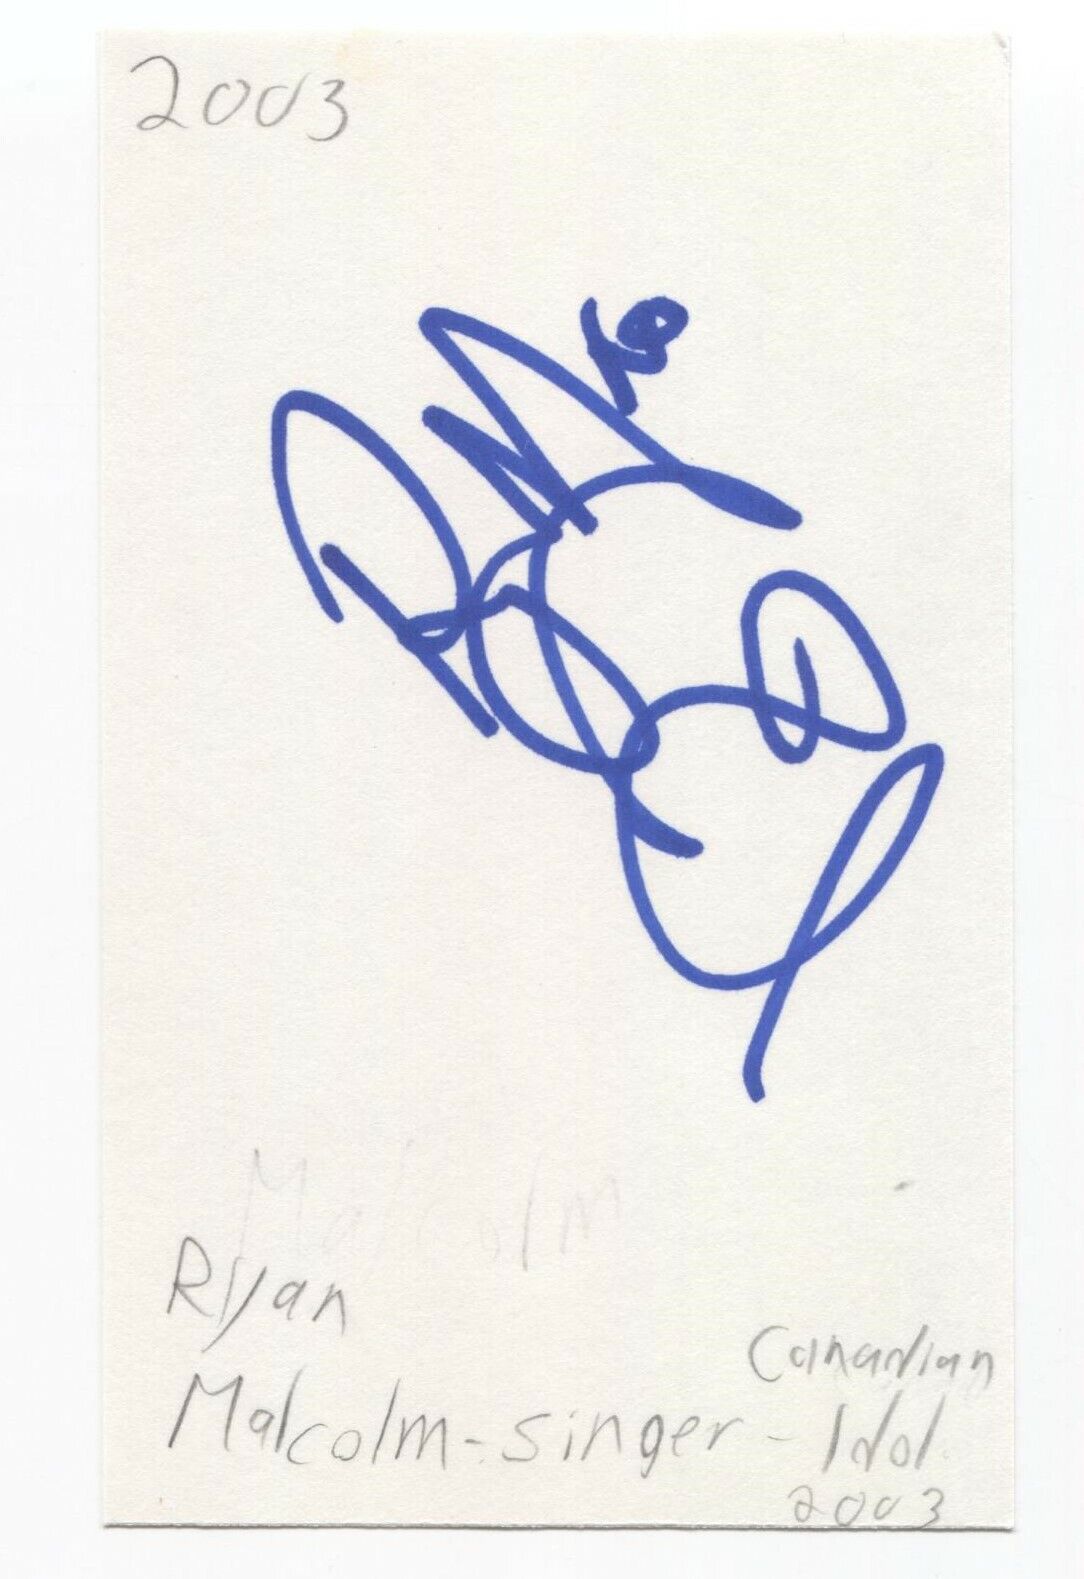 Low Level Flight - Ryan Malcolm Signed 3x5 Index Card Autographed Signature